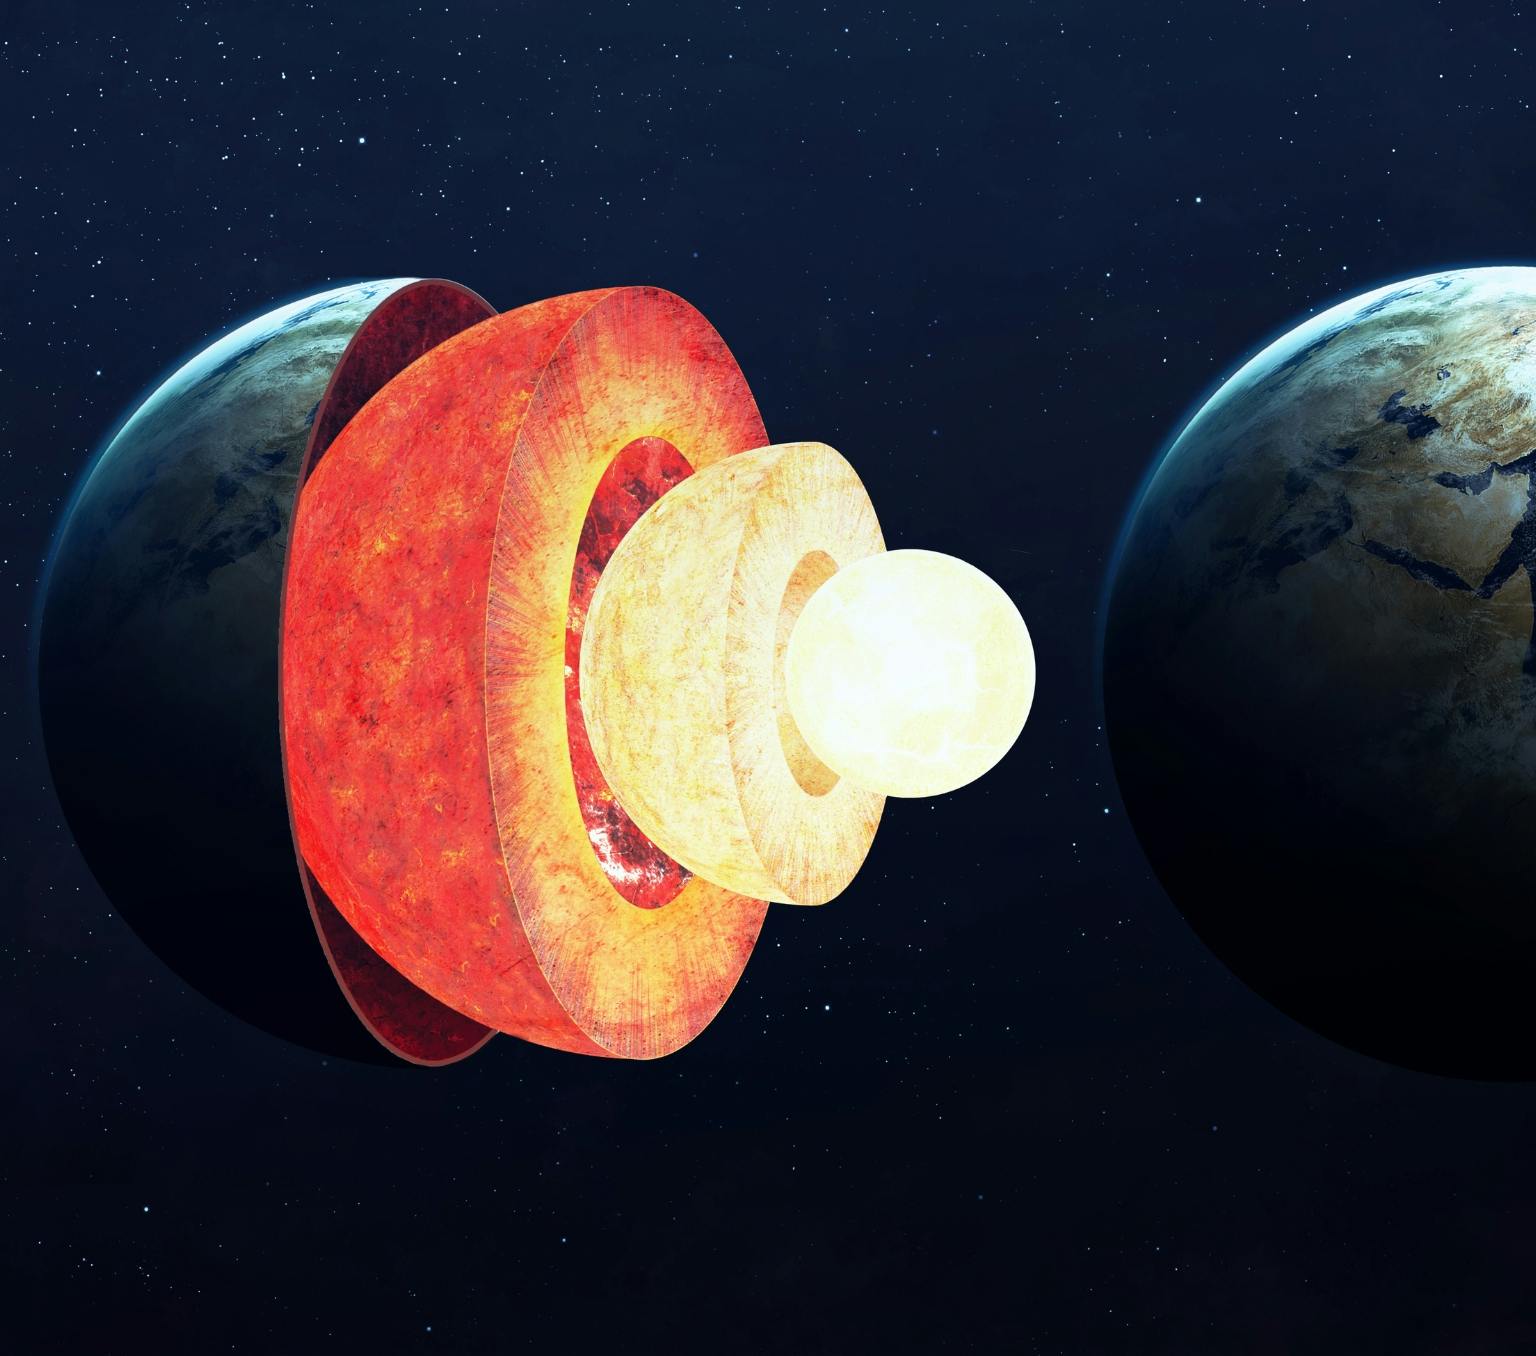 The inside of Earth split into several layers that glow a distinct orange and yellow